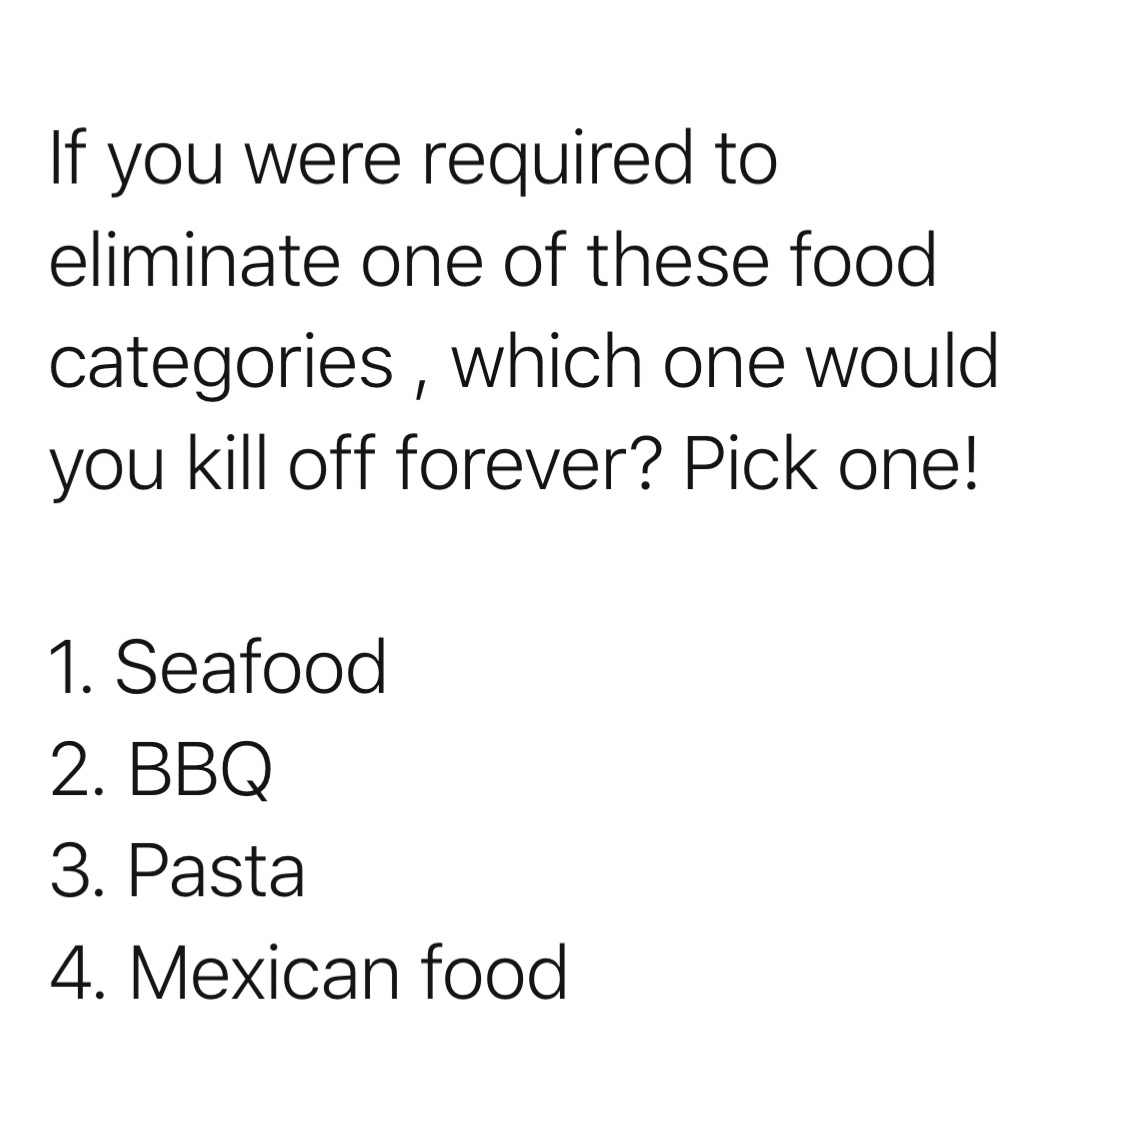 immaculate mother lyrics - If you were required to eliminate one of these food categories , which one would you kill off forever? Pick one! 1. Seafood 2. Bbq 3. Pasta 4. Mexican food